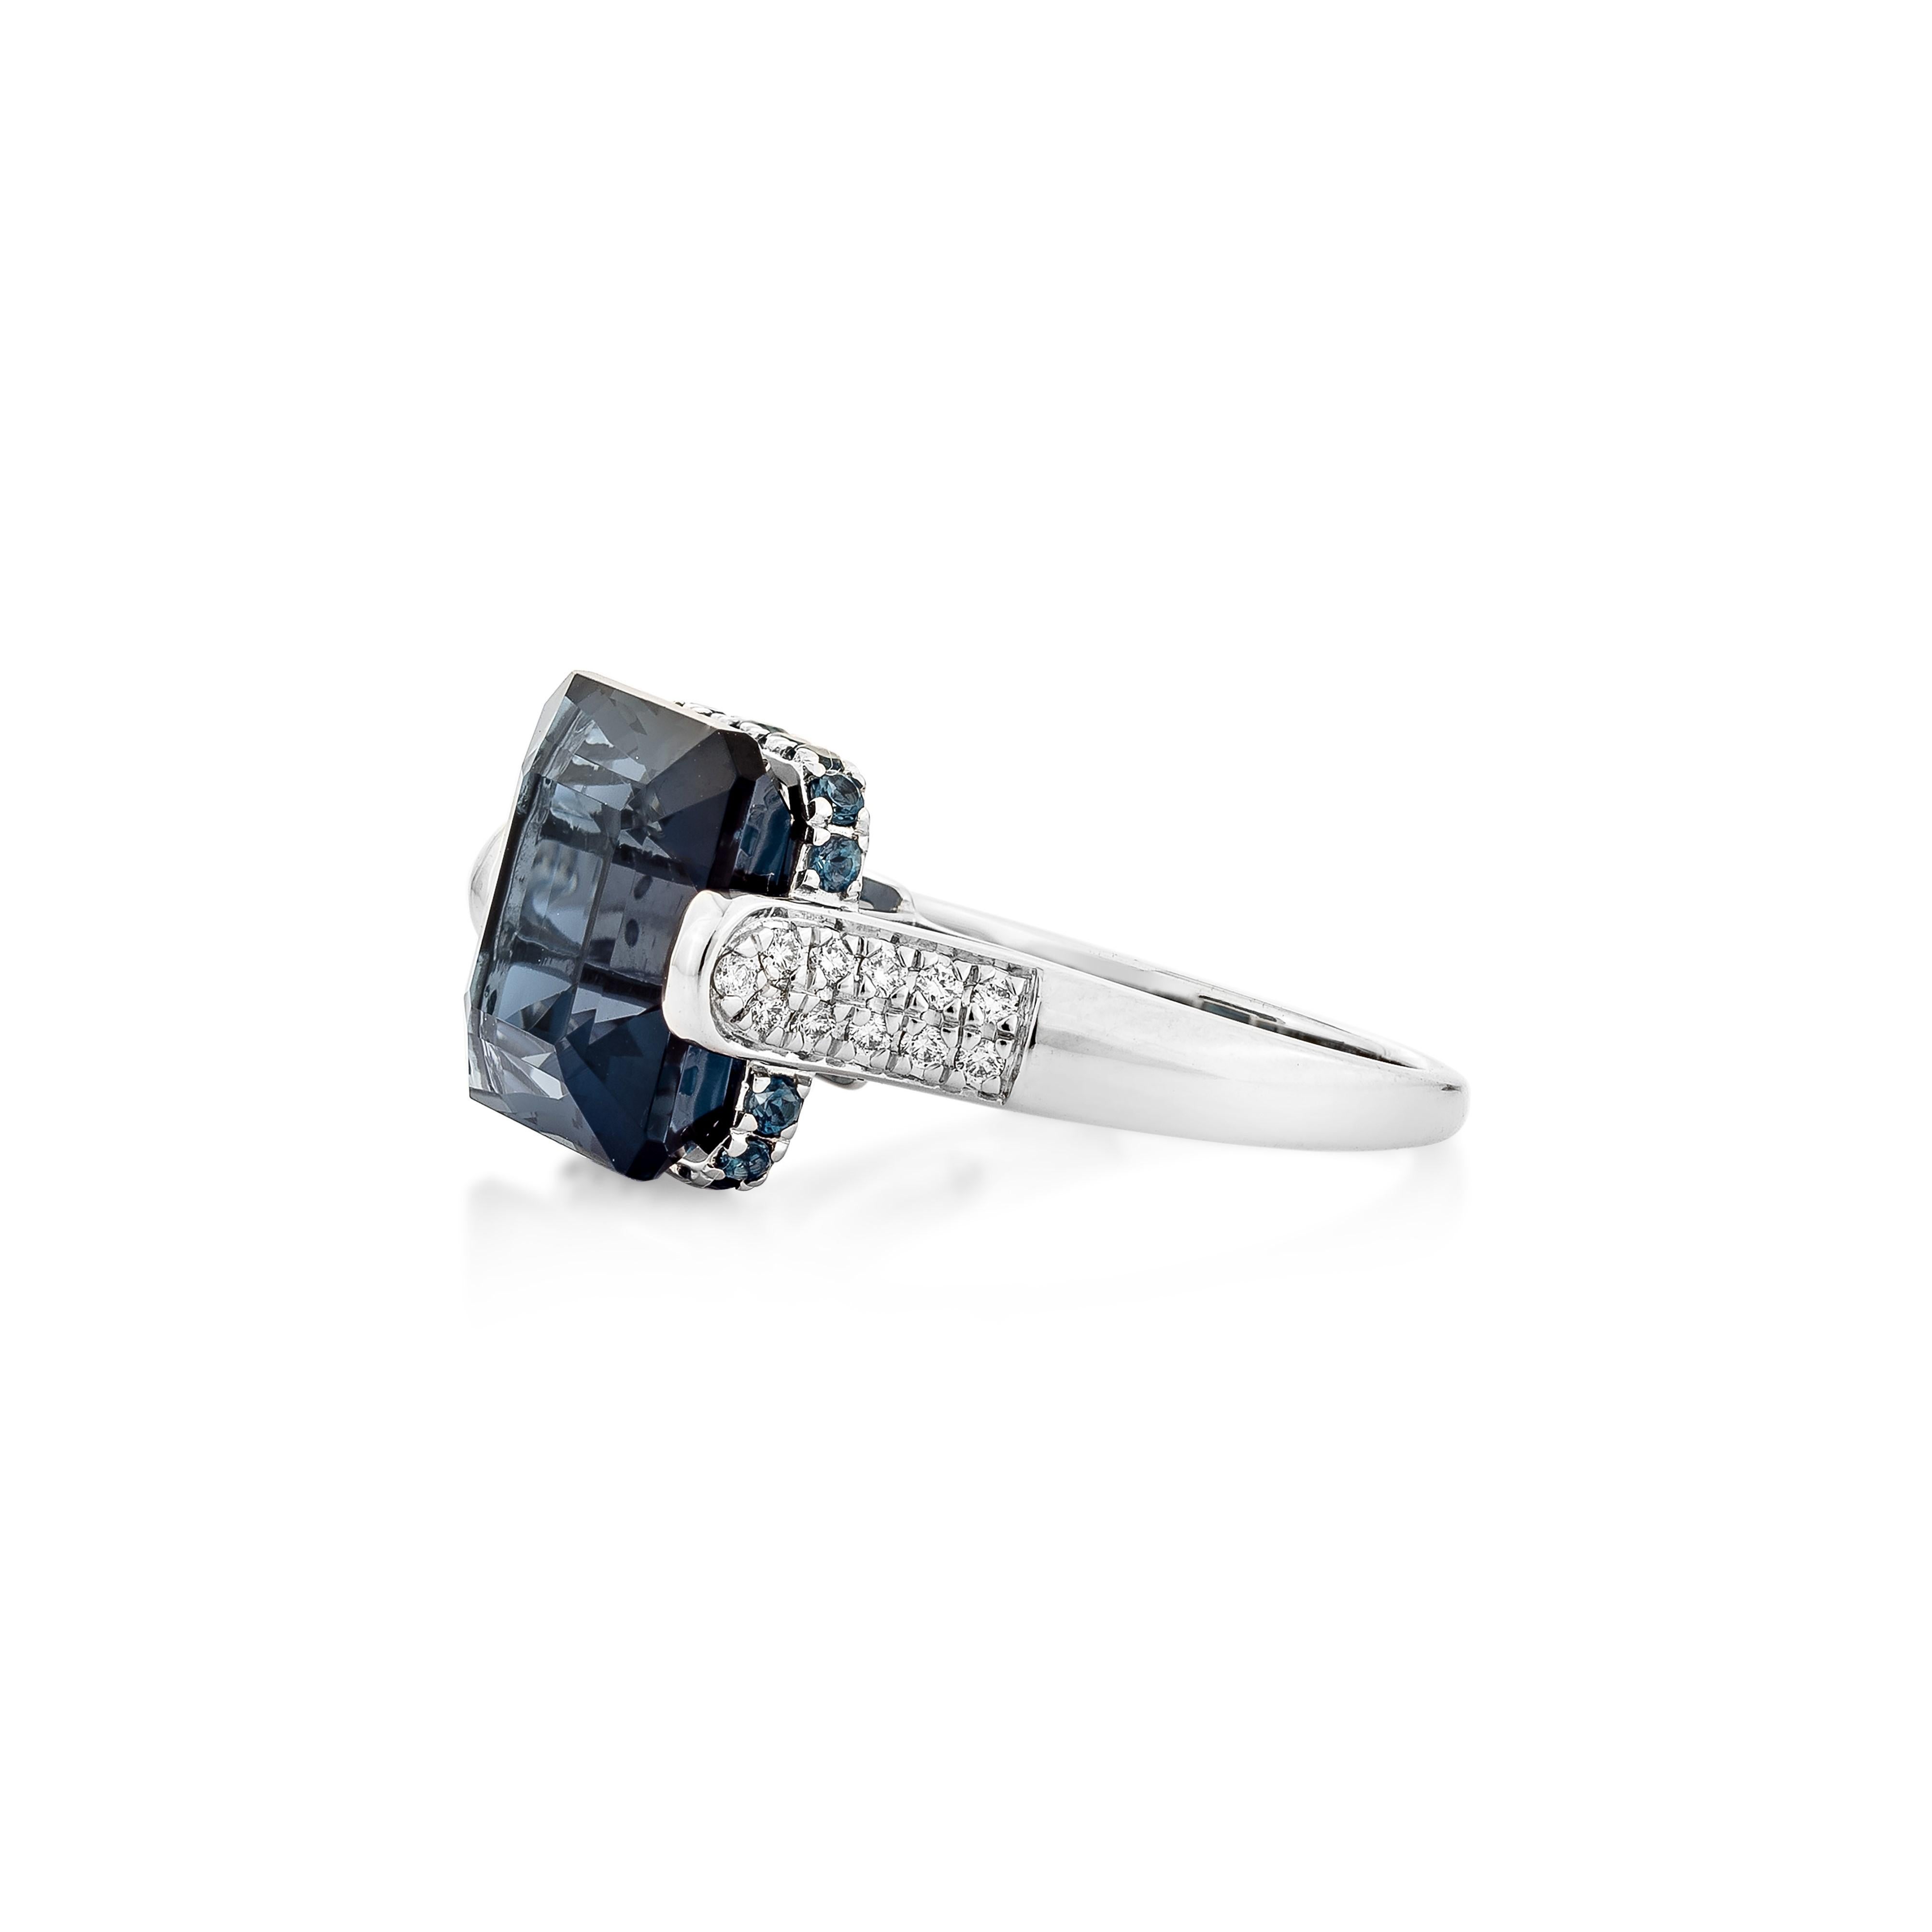 Octagon Cut 10.81 Carat London Blue Topaz Fancy Ring in 18KWG with White Diamond. For Sale